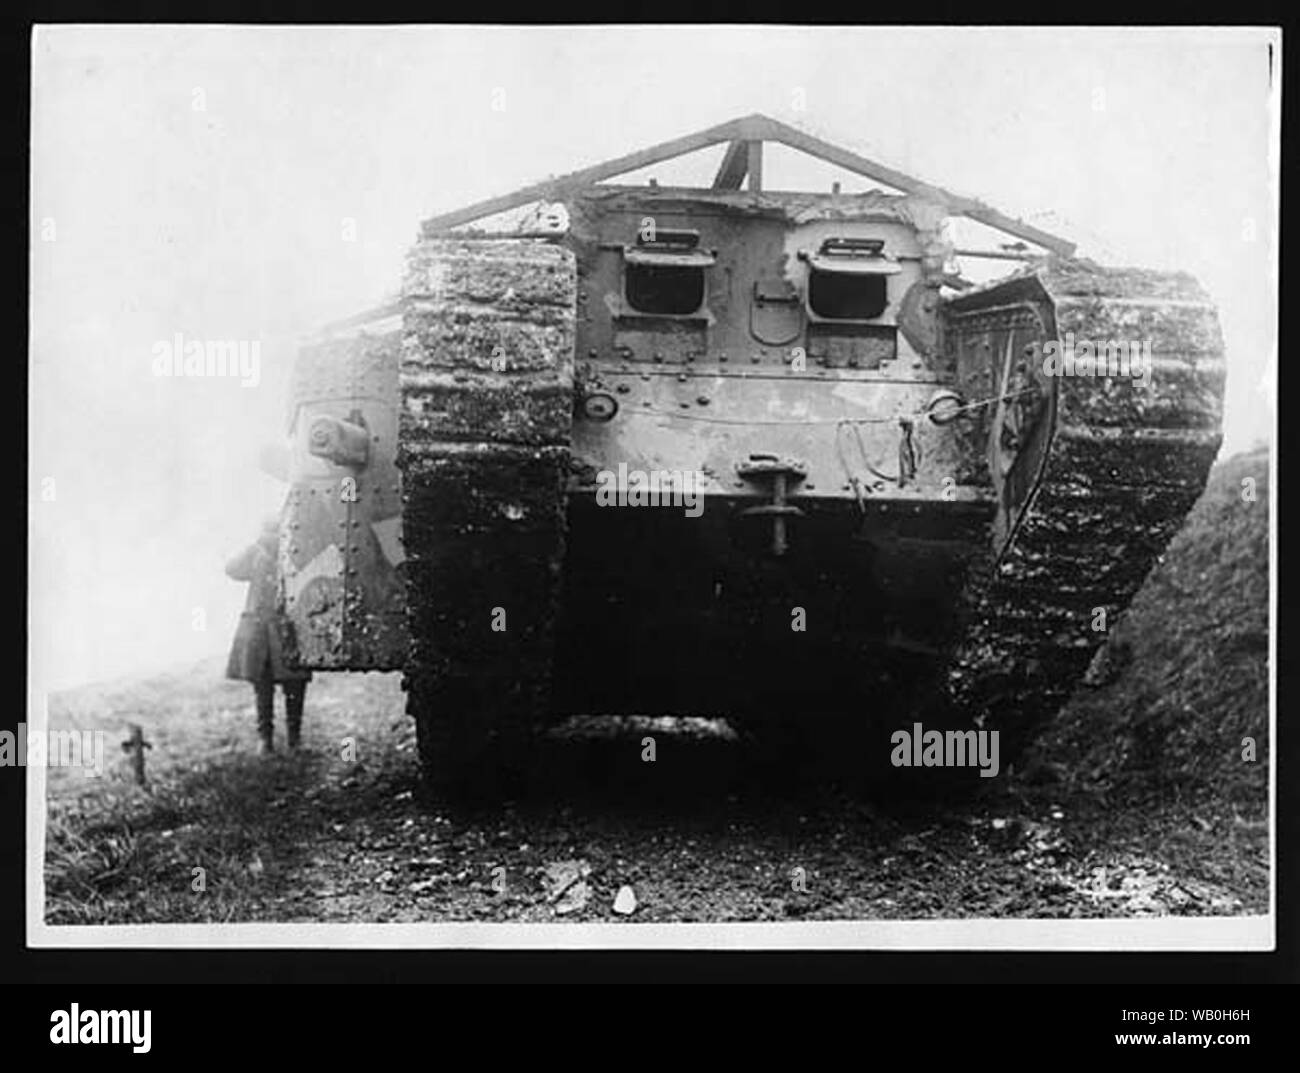 Vintage WWI armoured car or tank related Black and white photograph Stock Photo